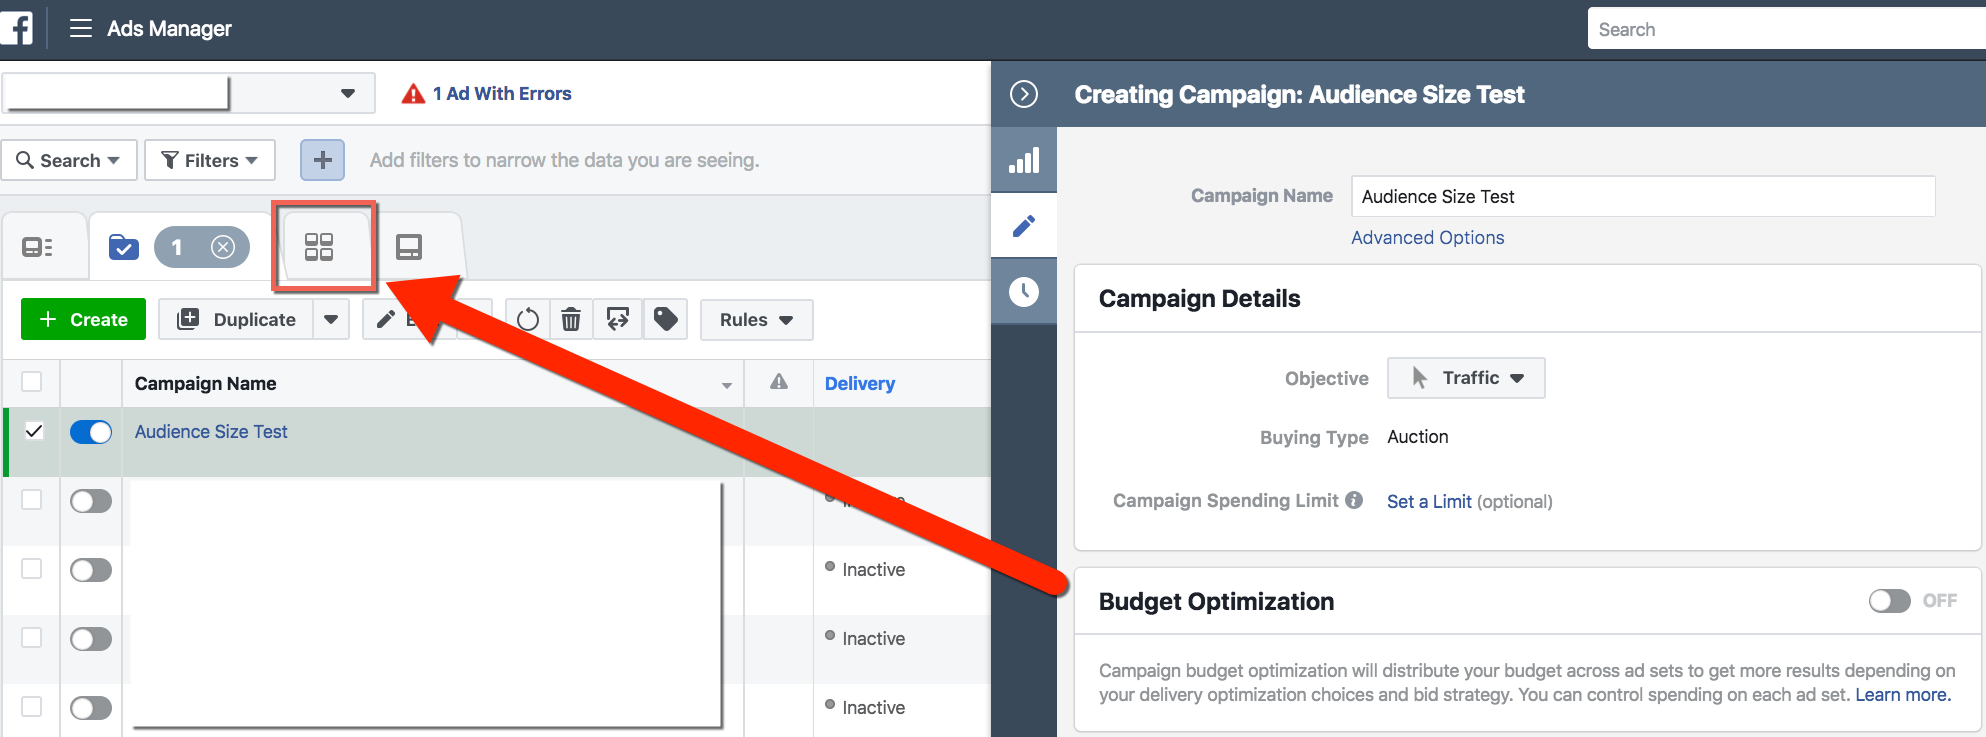 Facebook Ads Manager - Campaign View